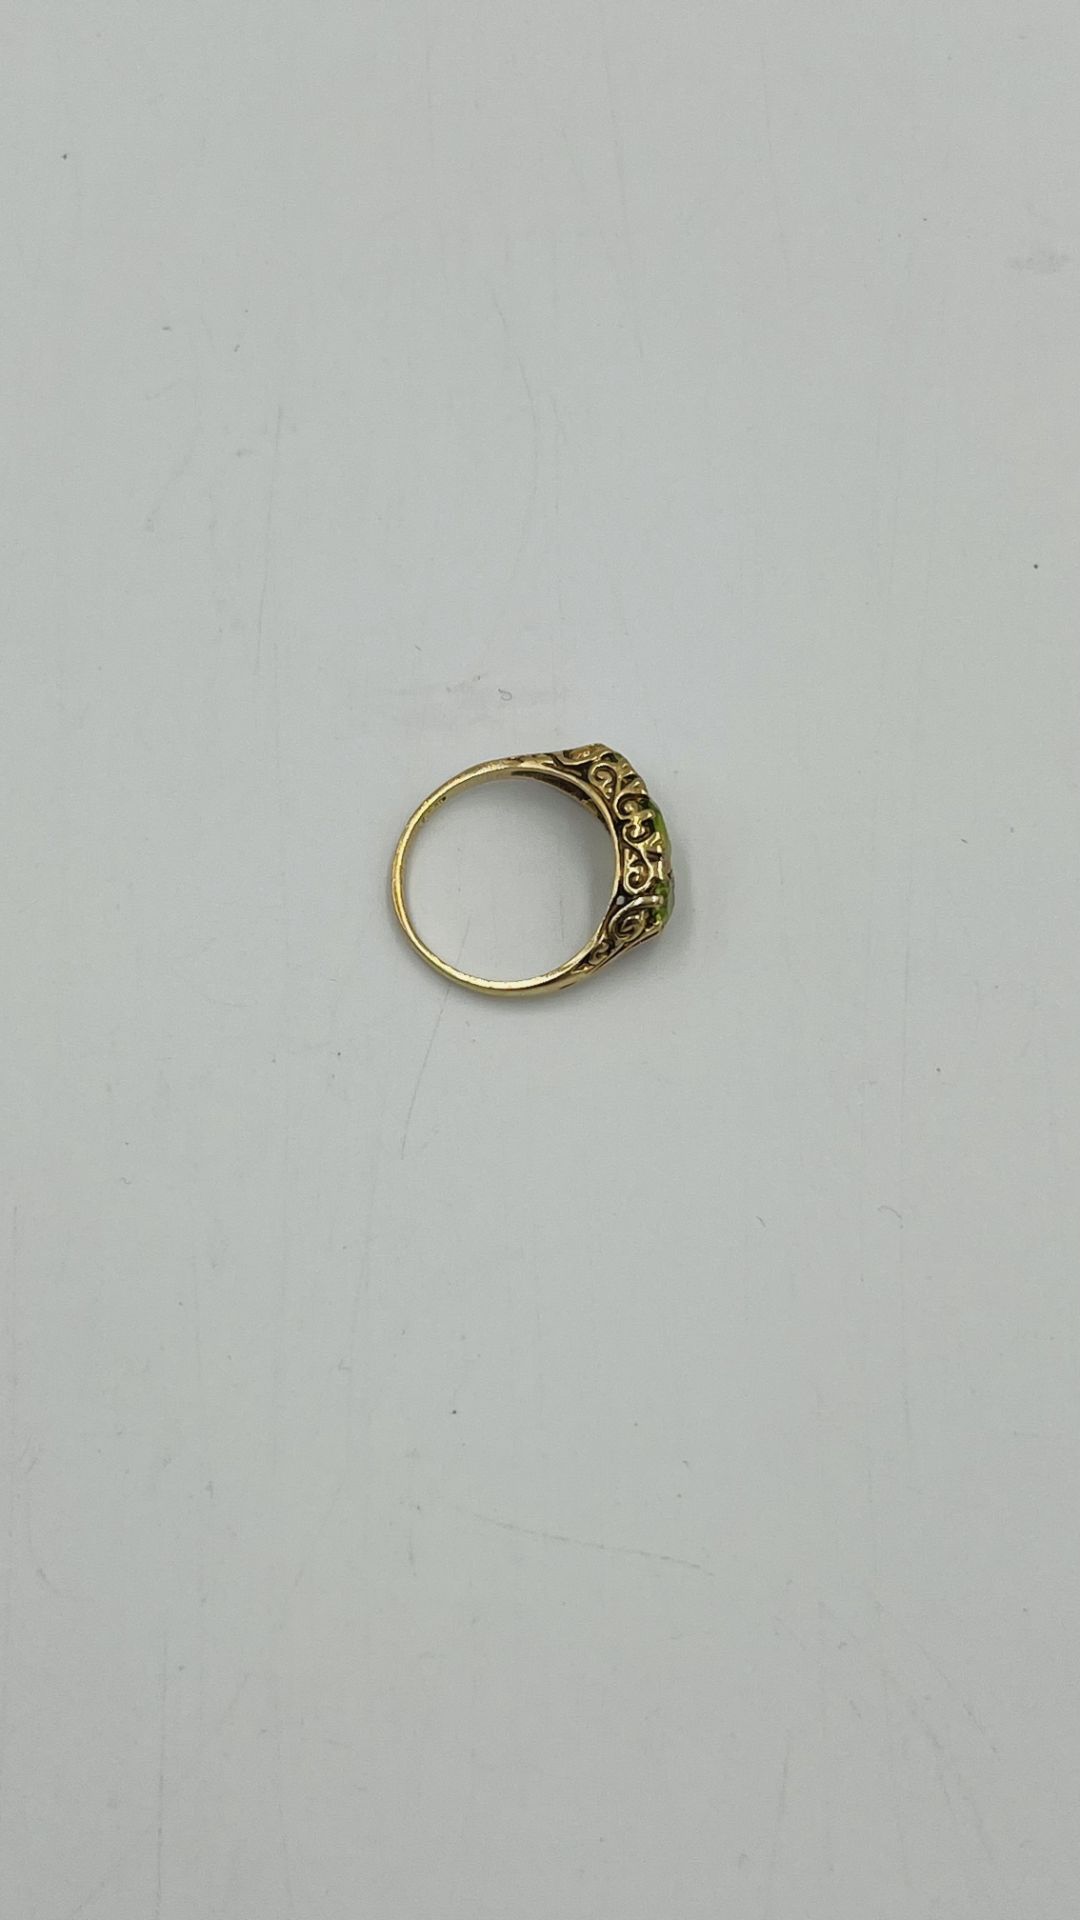 9ct gold ring set with a green stone - Image 4 of 4